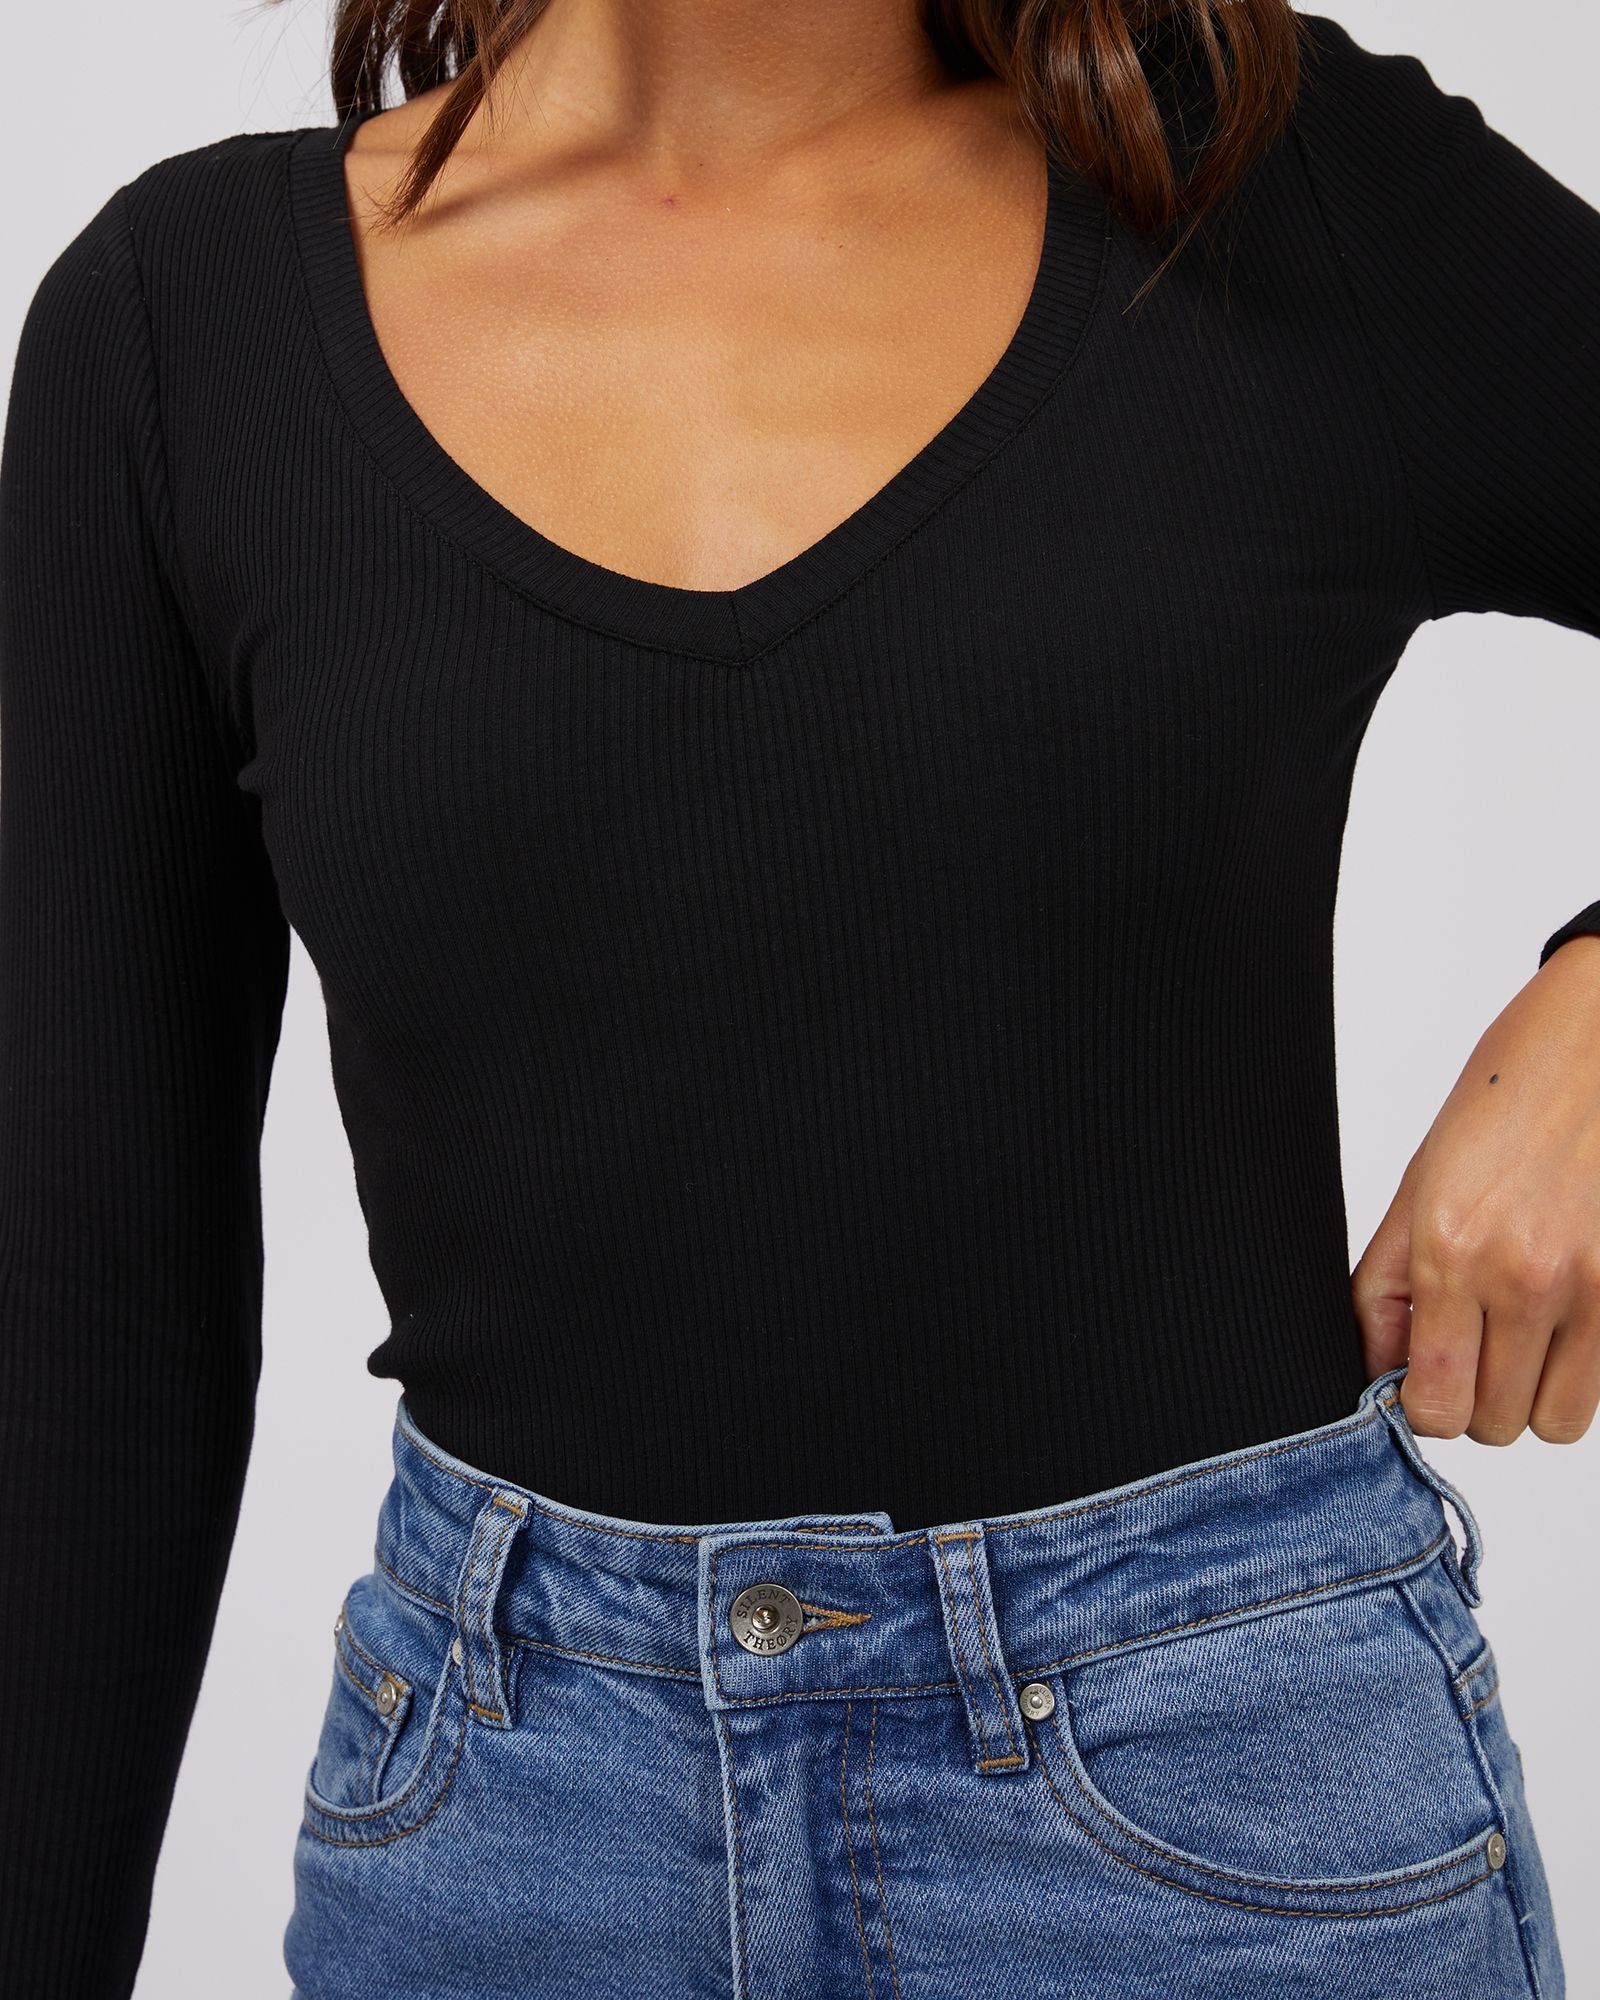 Silent Theory Lily Long Sleeve [COLOUR:Black SIZE:6]